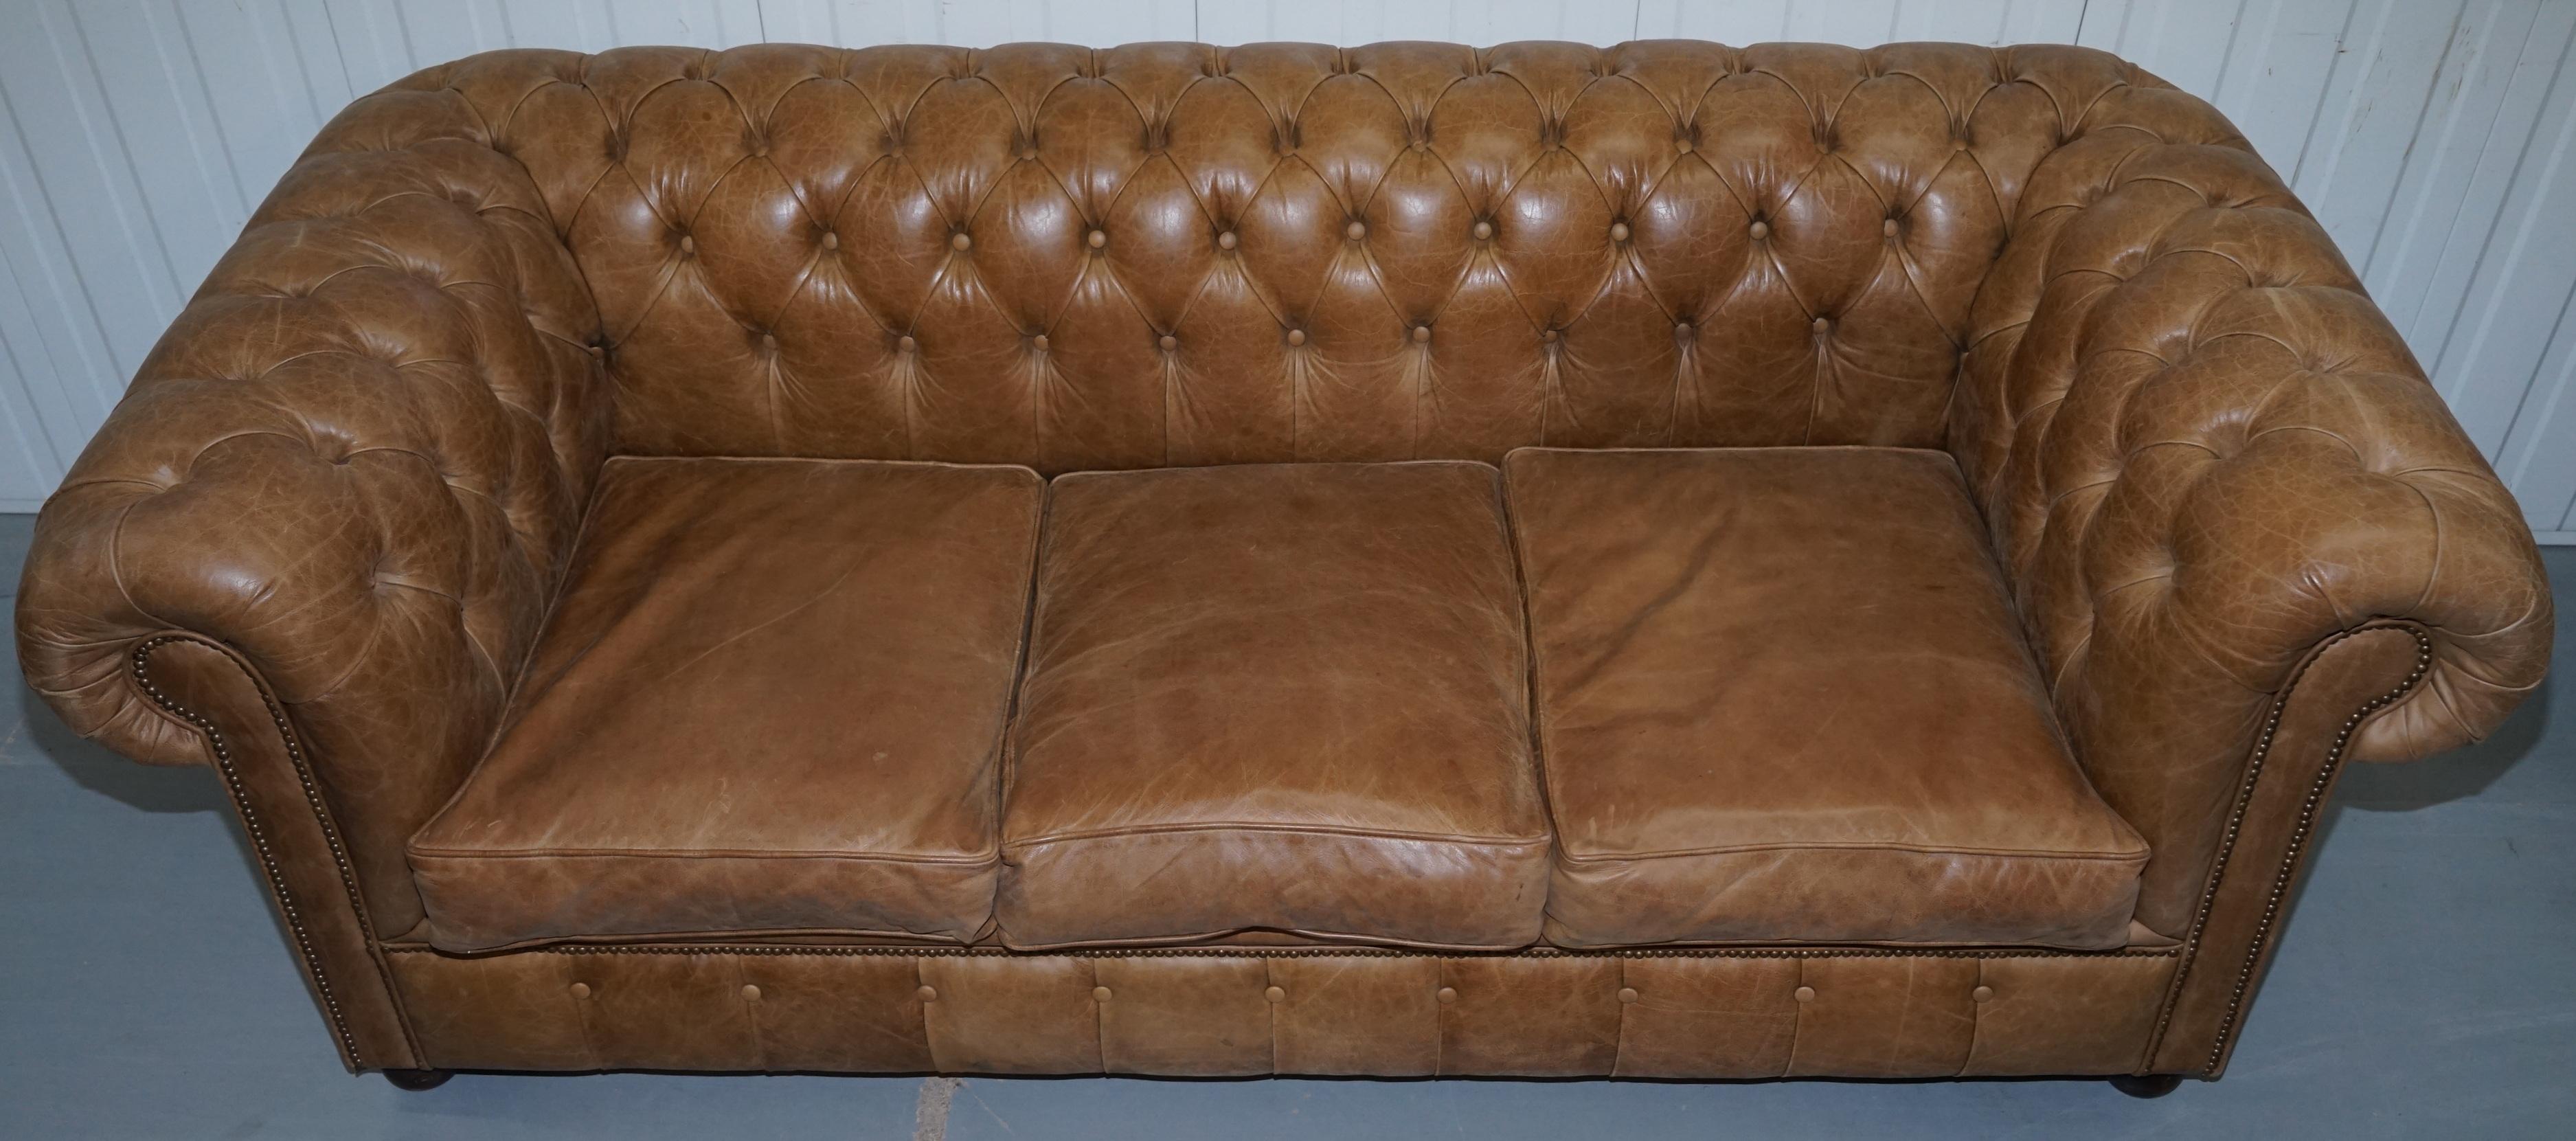 aged brown leather